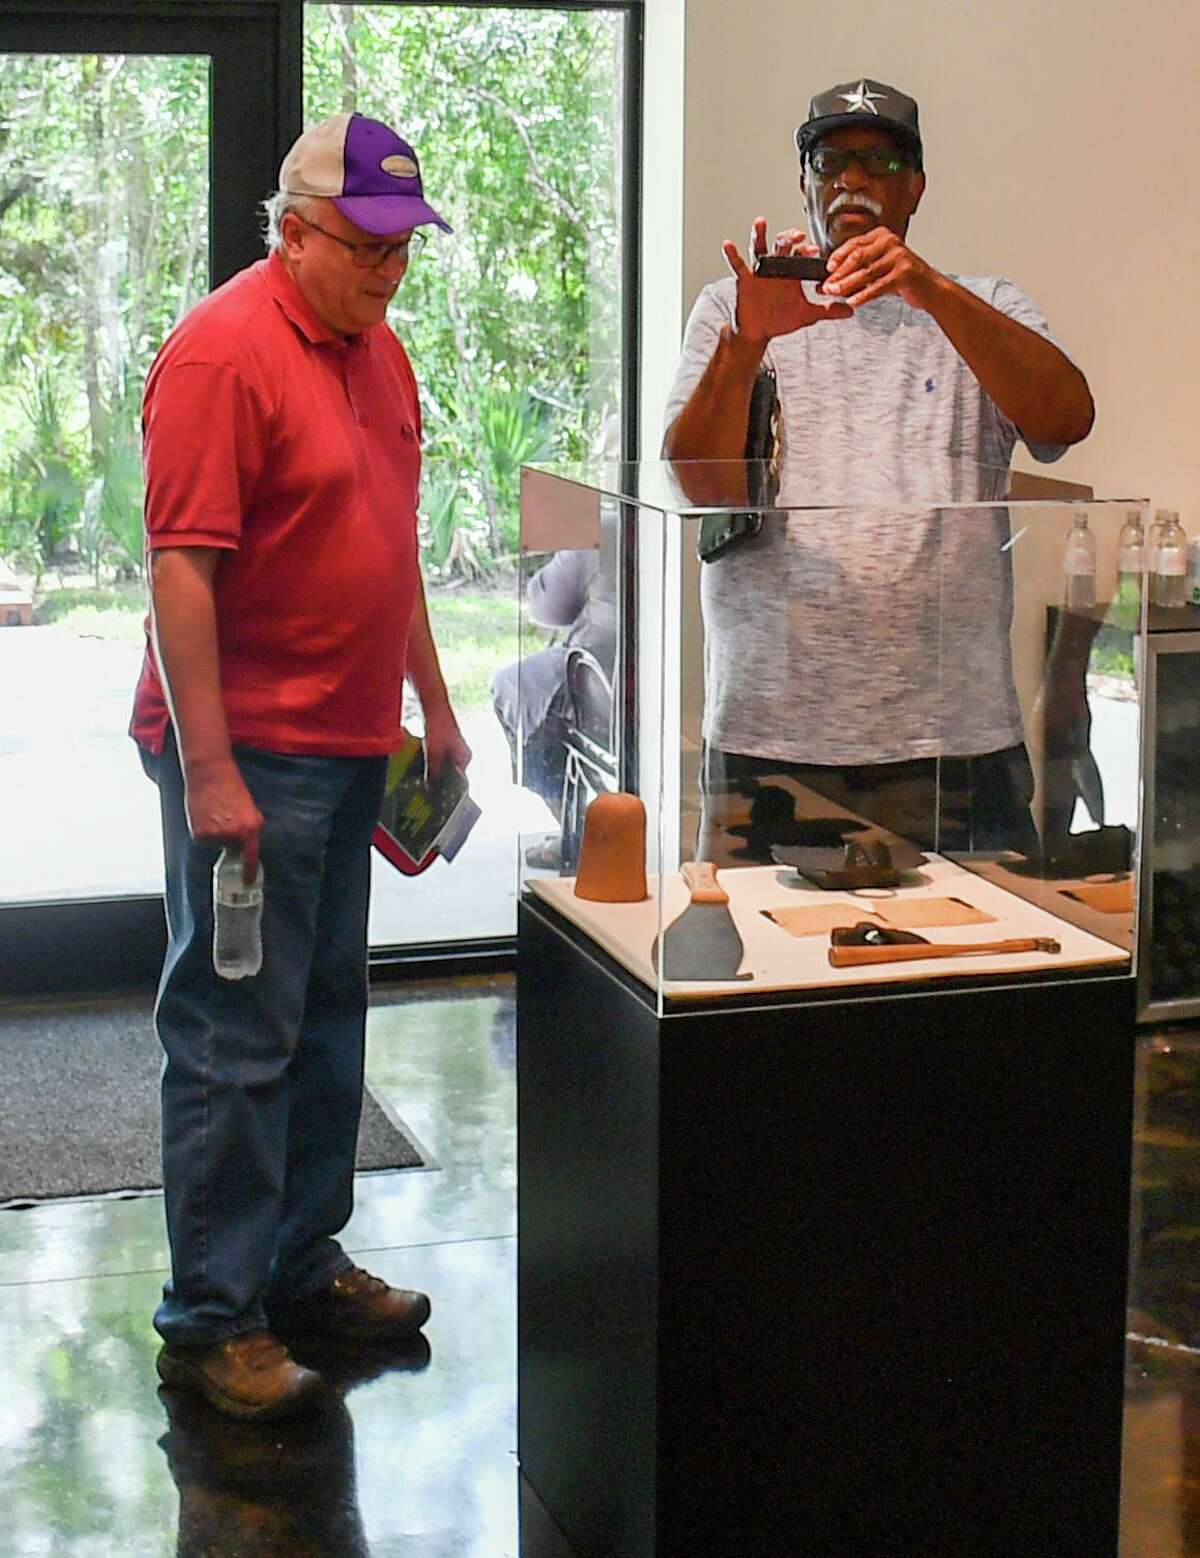 George Avery, left, and Archie Rison discuss the artifacts on display at the visitor’s center at the Levi Jordan Plantation State Historic Site during the site’s reopening event June 11, 2022.